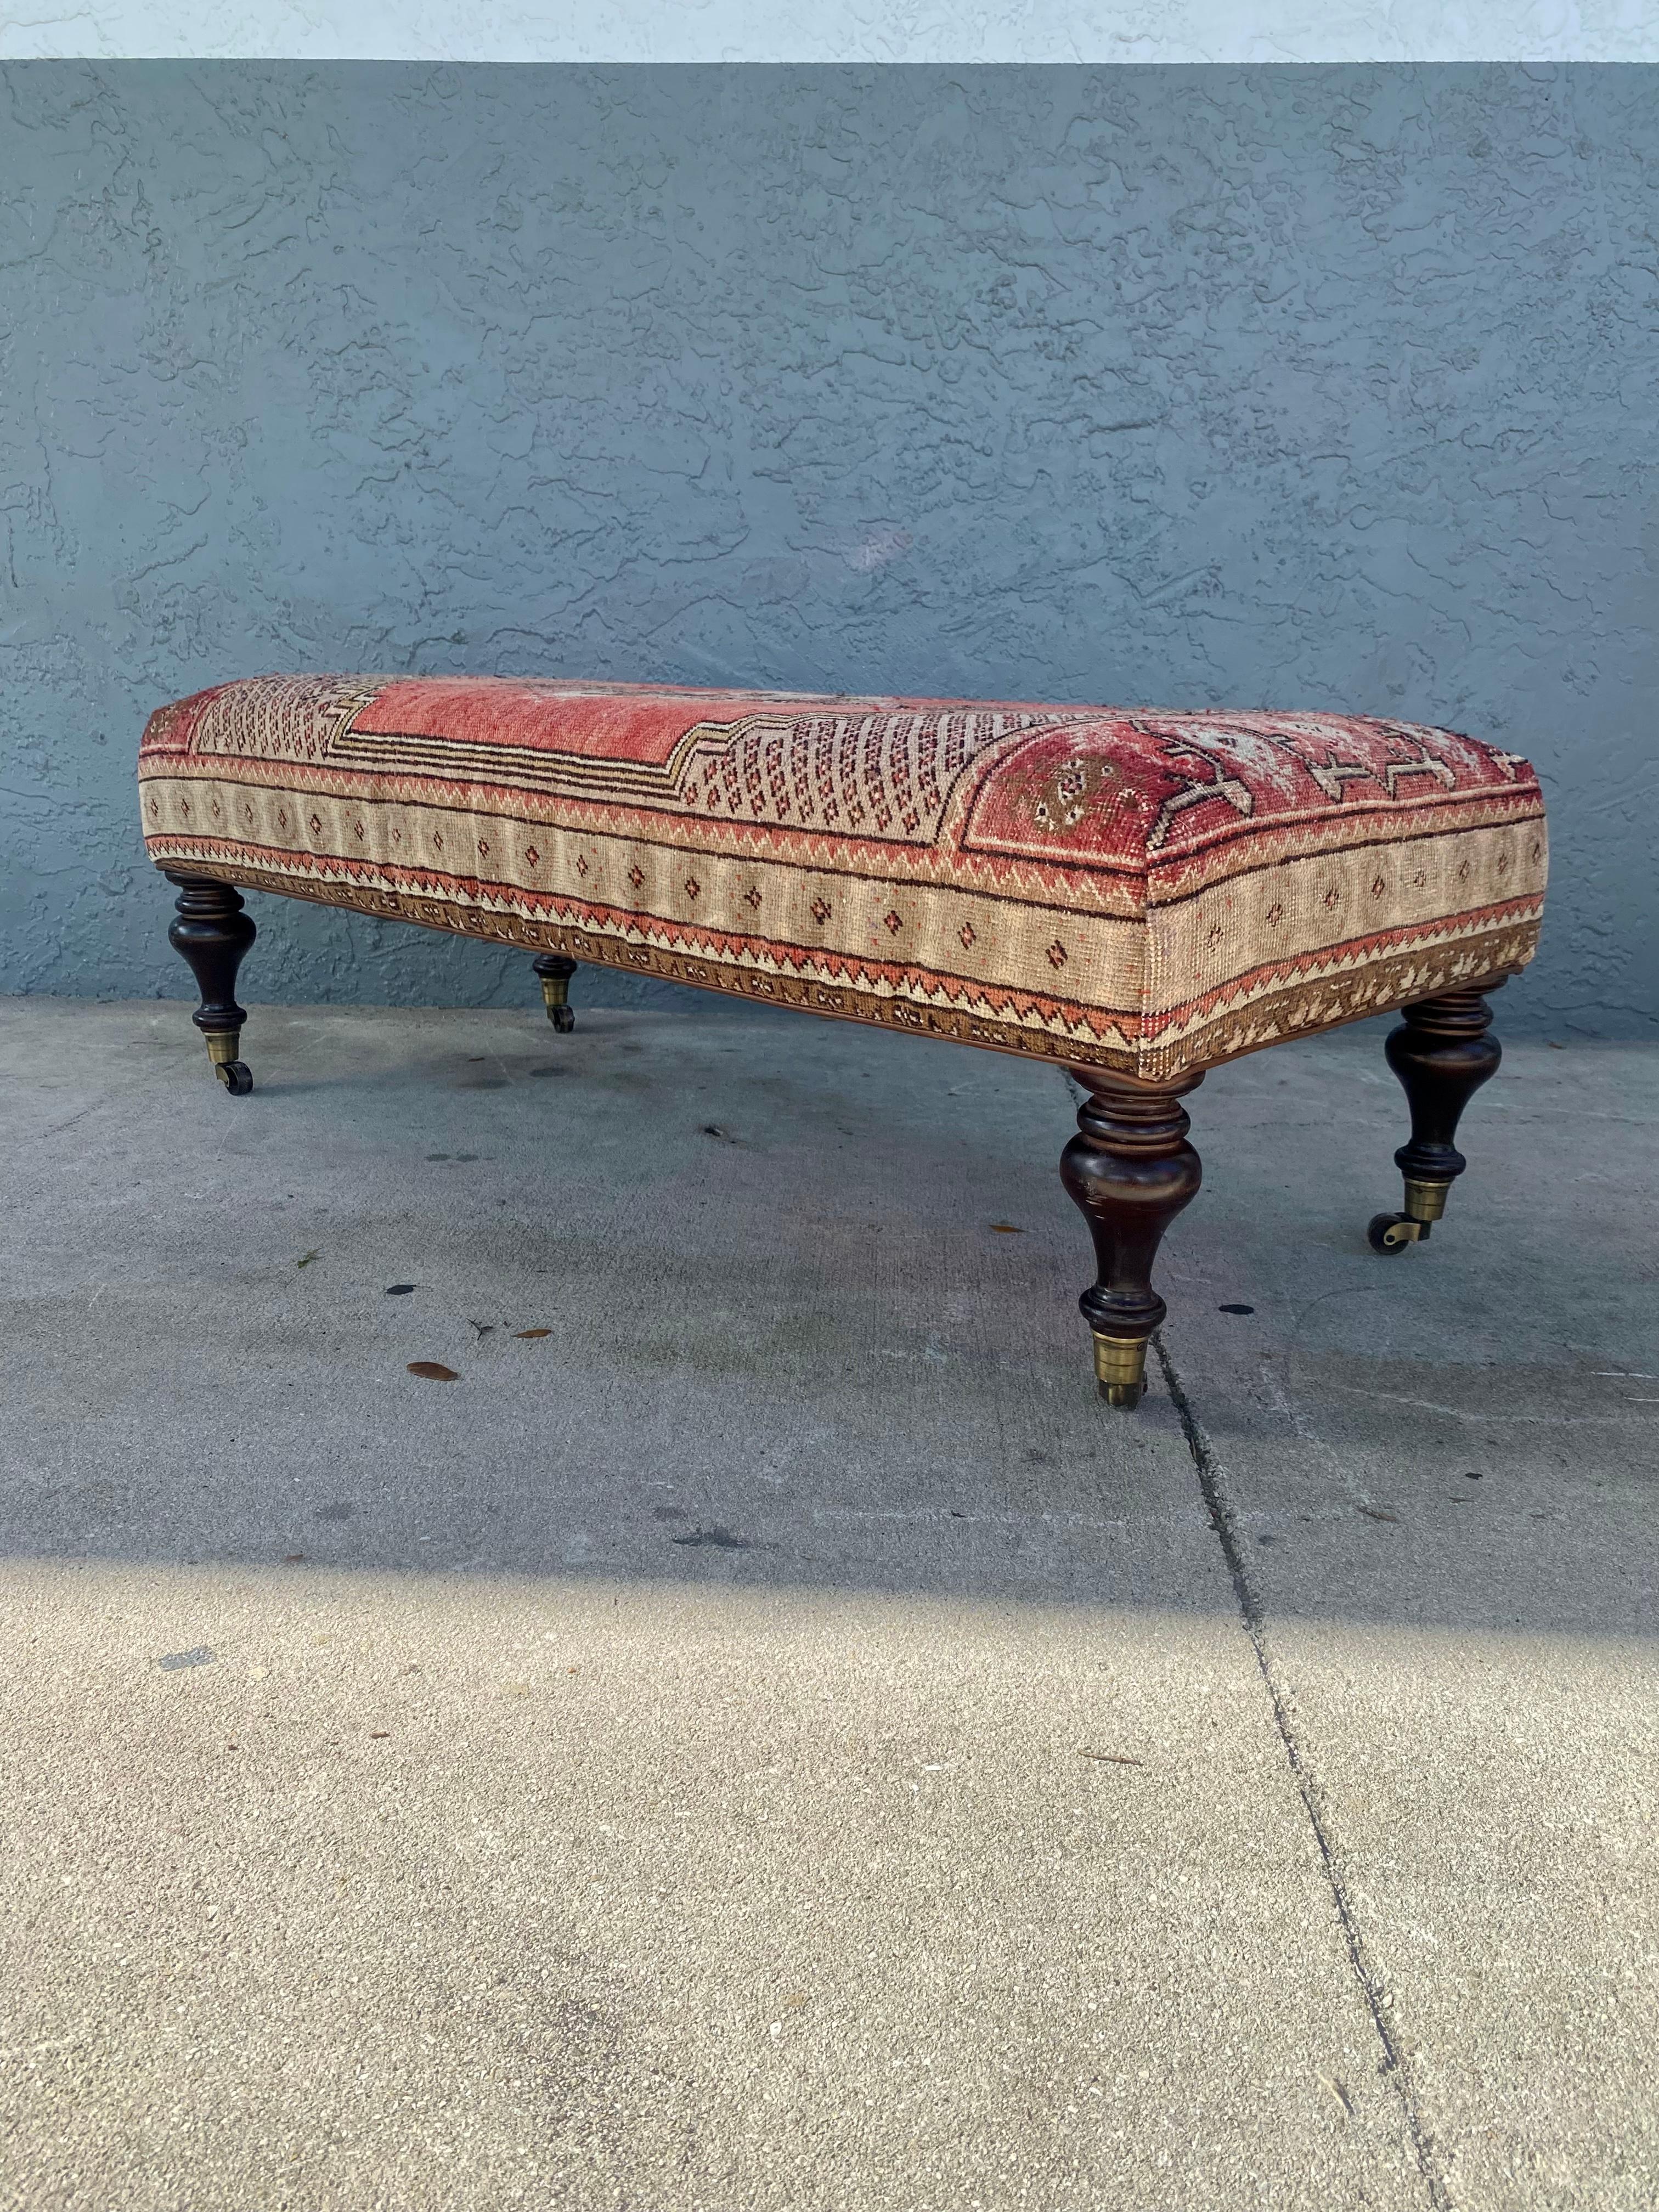 On offer on this occasion is one of the most stunning Kilim wool bench on brass castors you could hope to find. Beautiful leather trimmings on the bottom of the bench.This is an ultra-rare opportunity to acquire what is, unequivocally, the best of